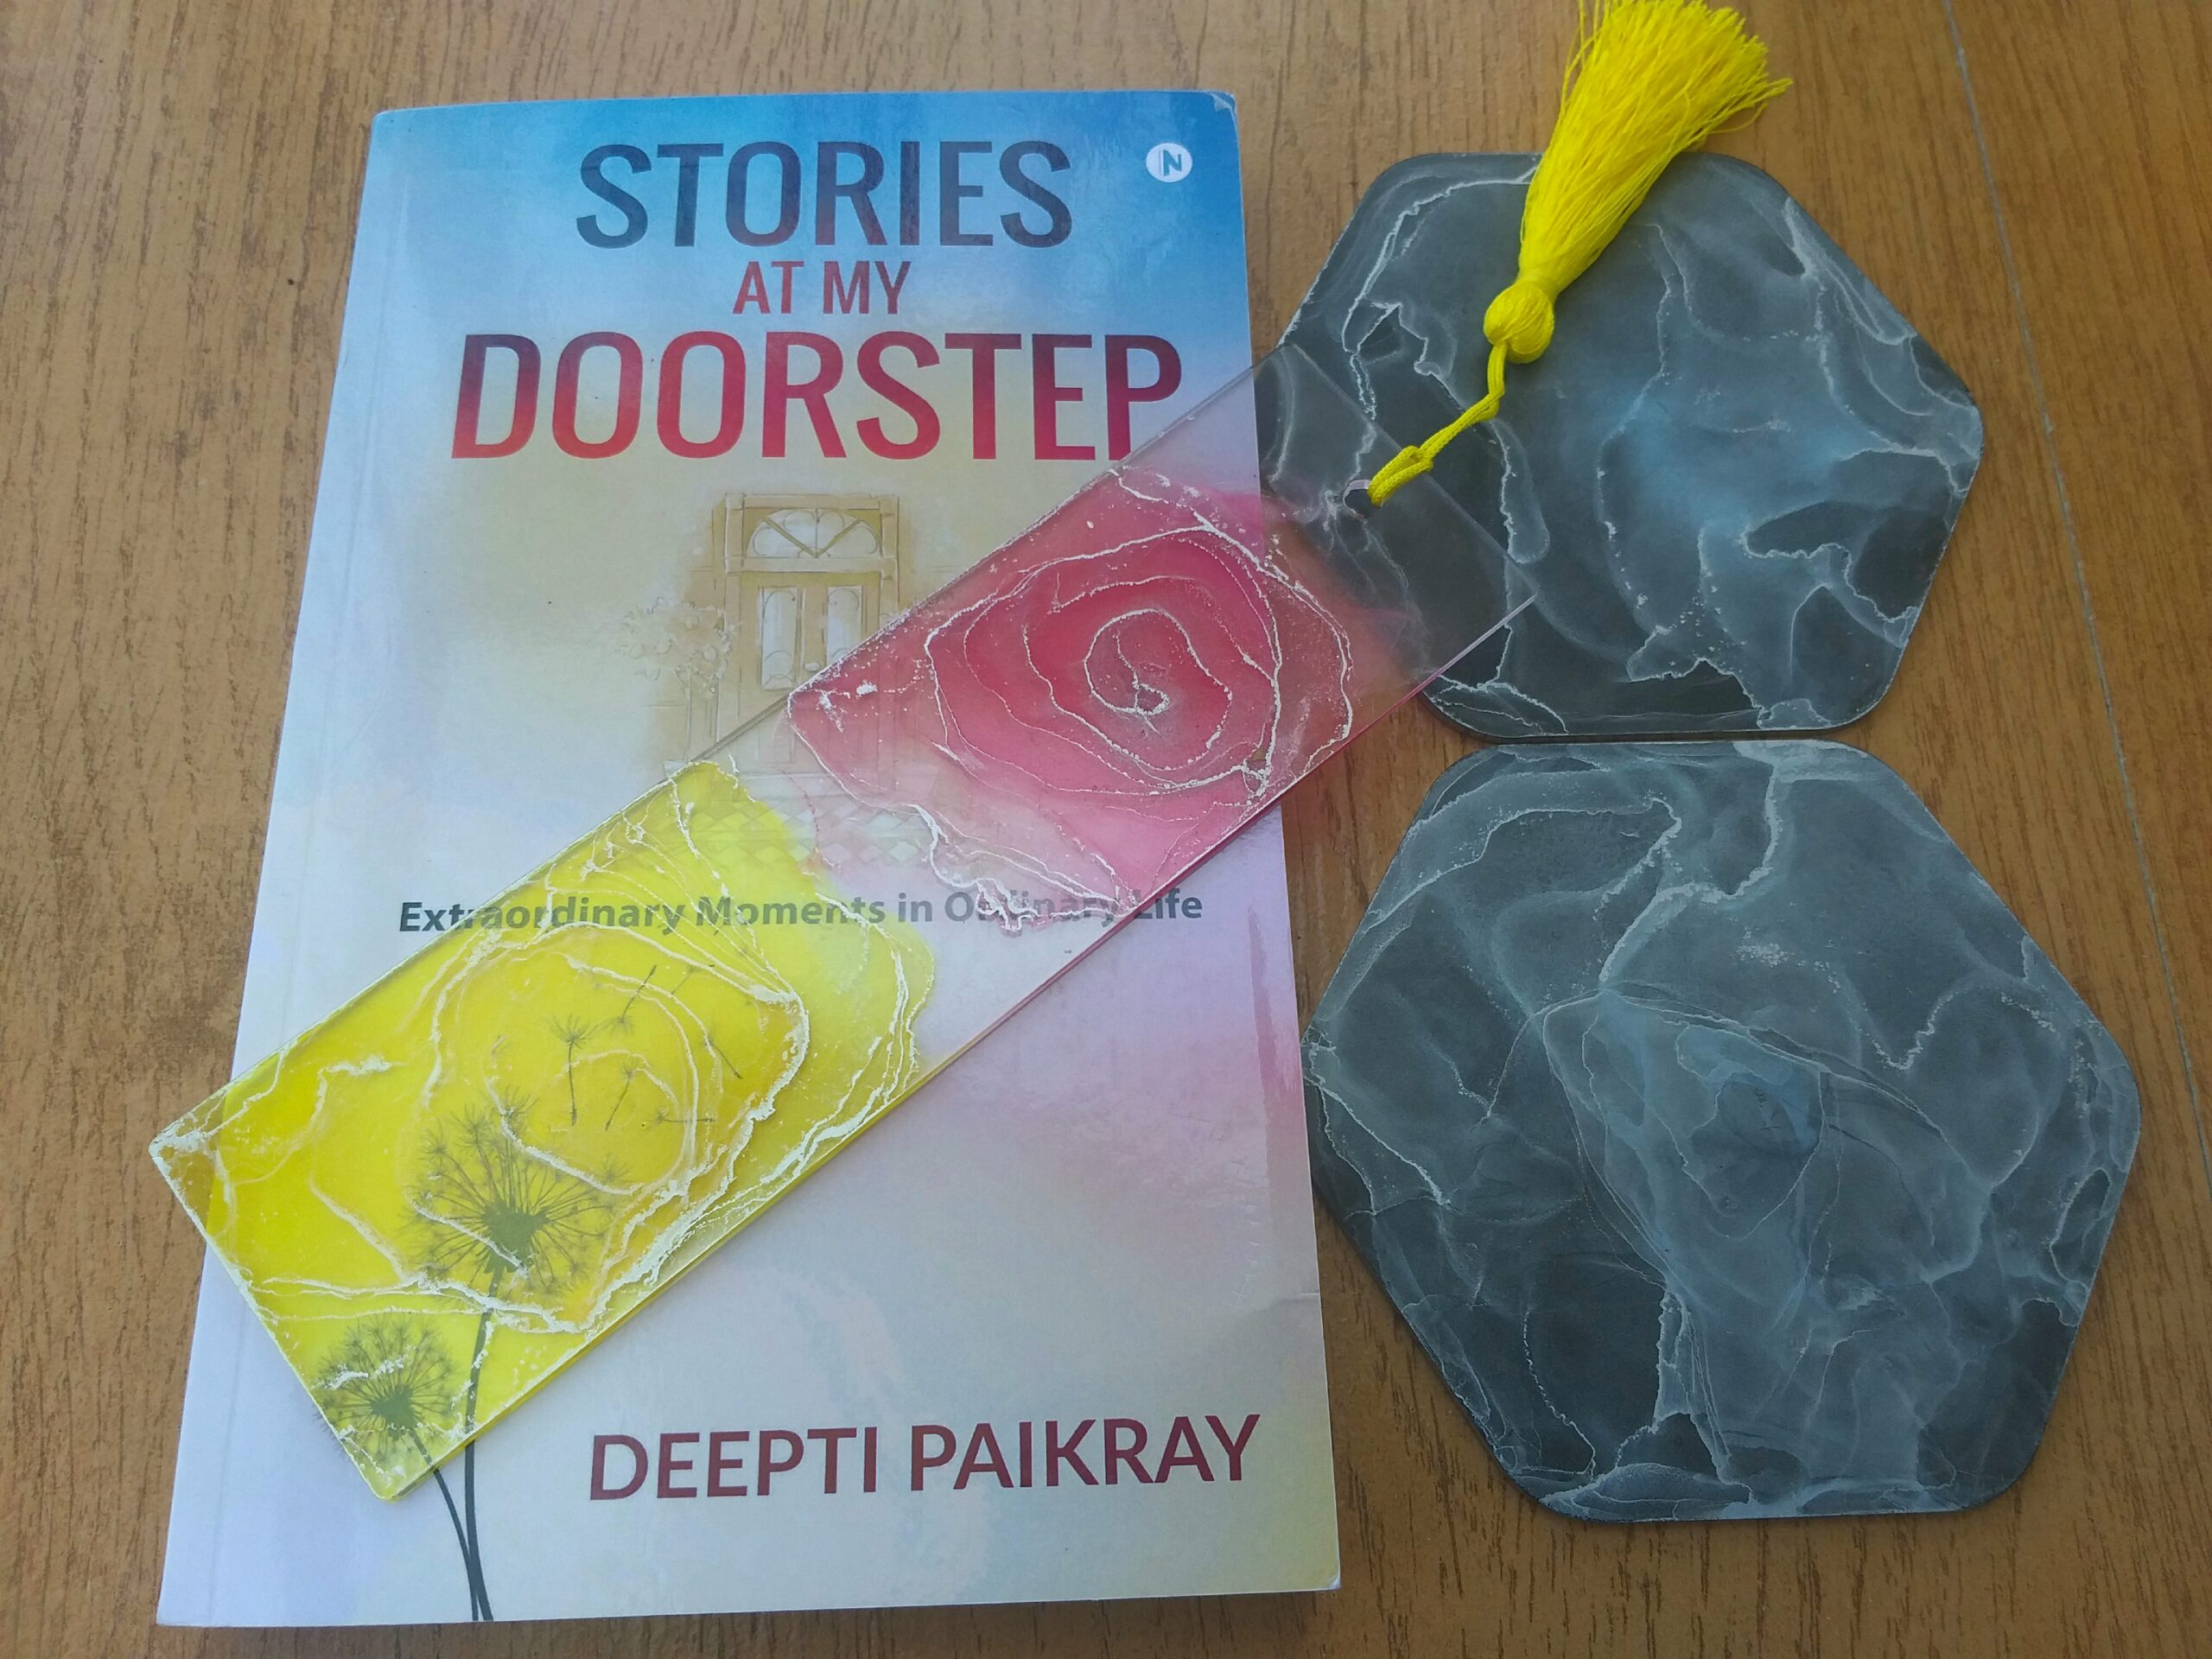 Stories at my Doorstep by Deepti Paikray